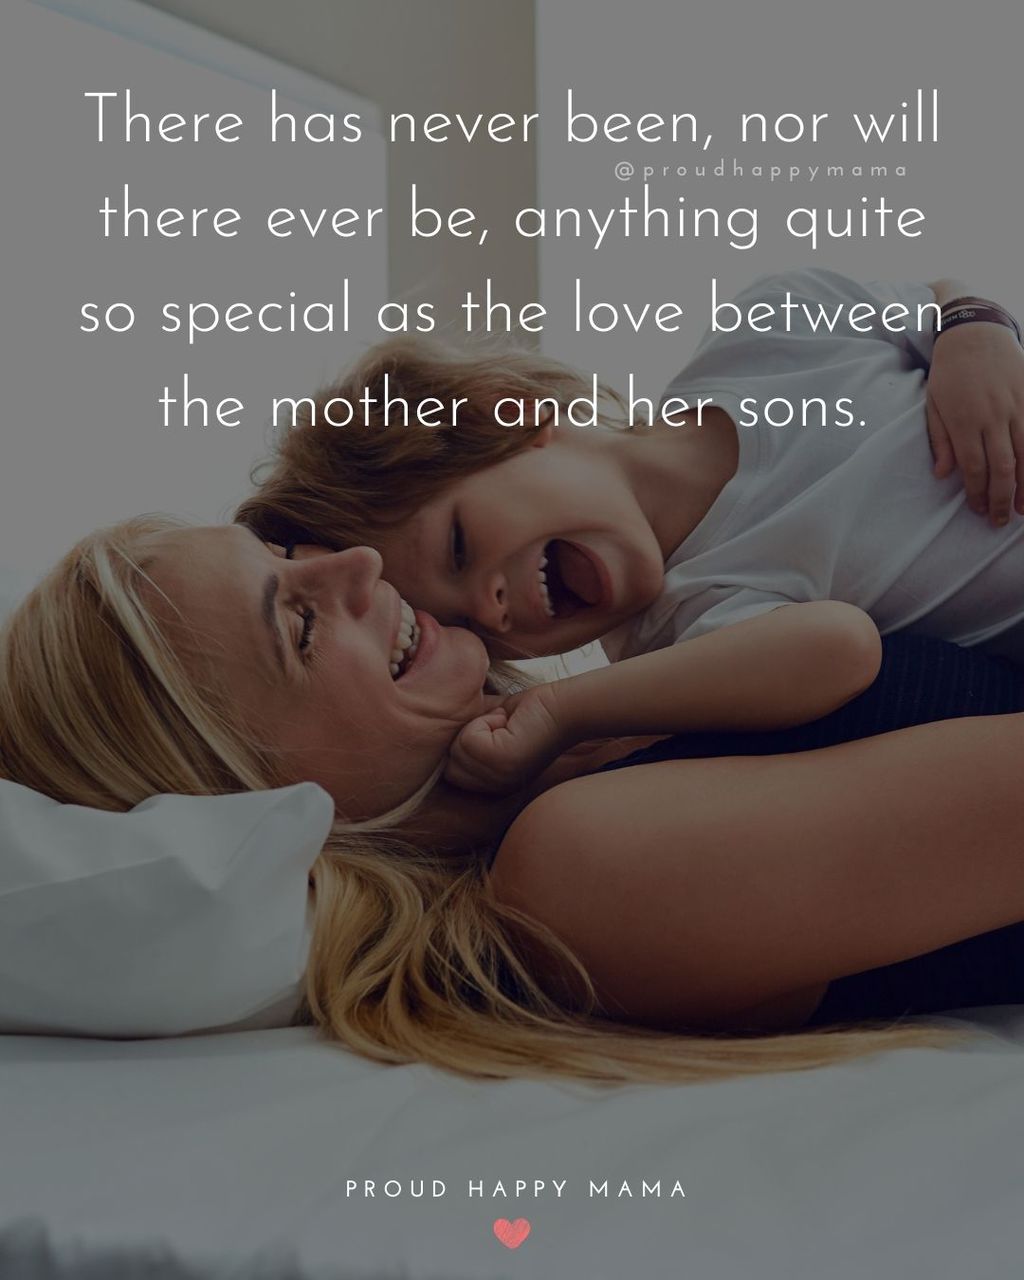 Boy Mom Quotes - There has never been, nor will there ever be, anything quite so special as the love between the mother and her sons.